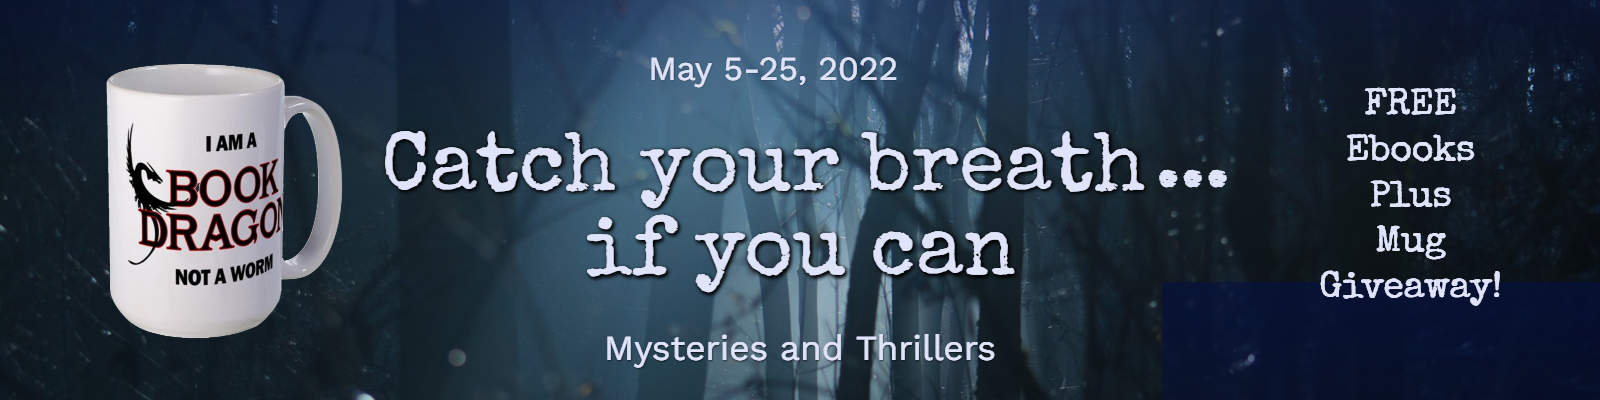 Catch Your Breath Mysteries and Thrillers